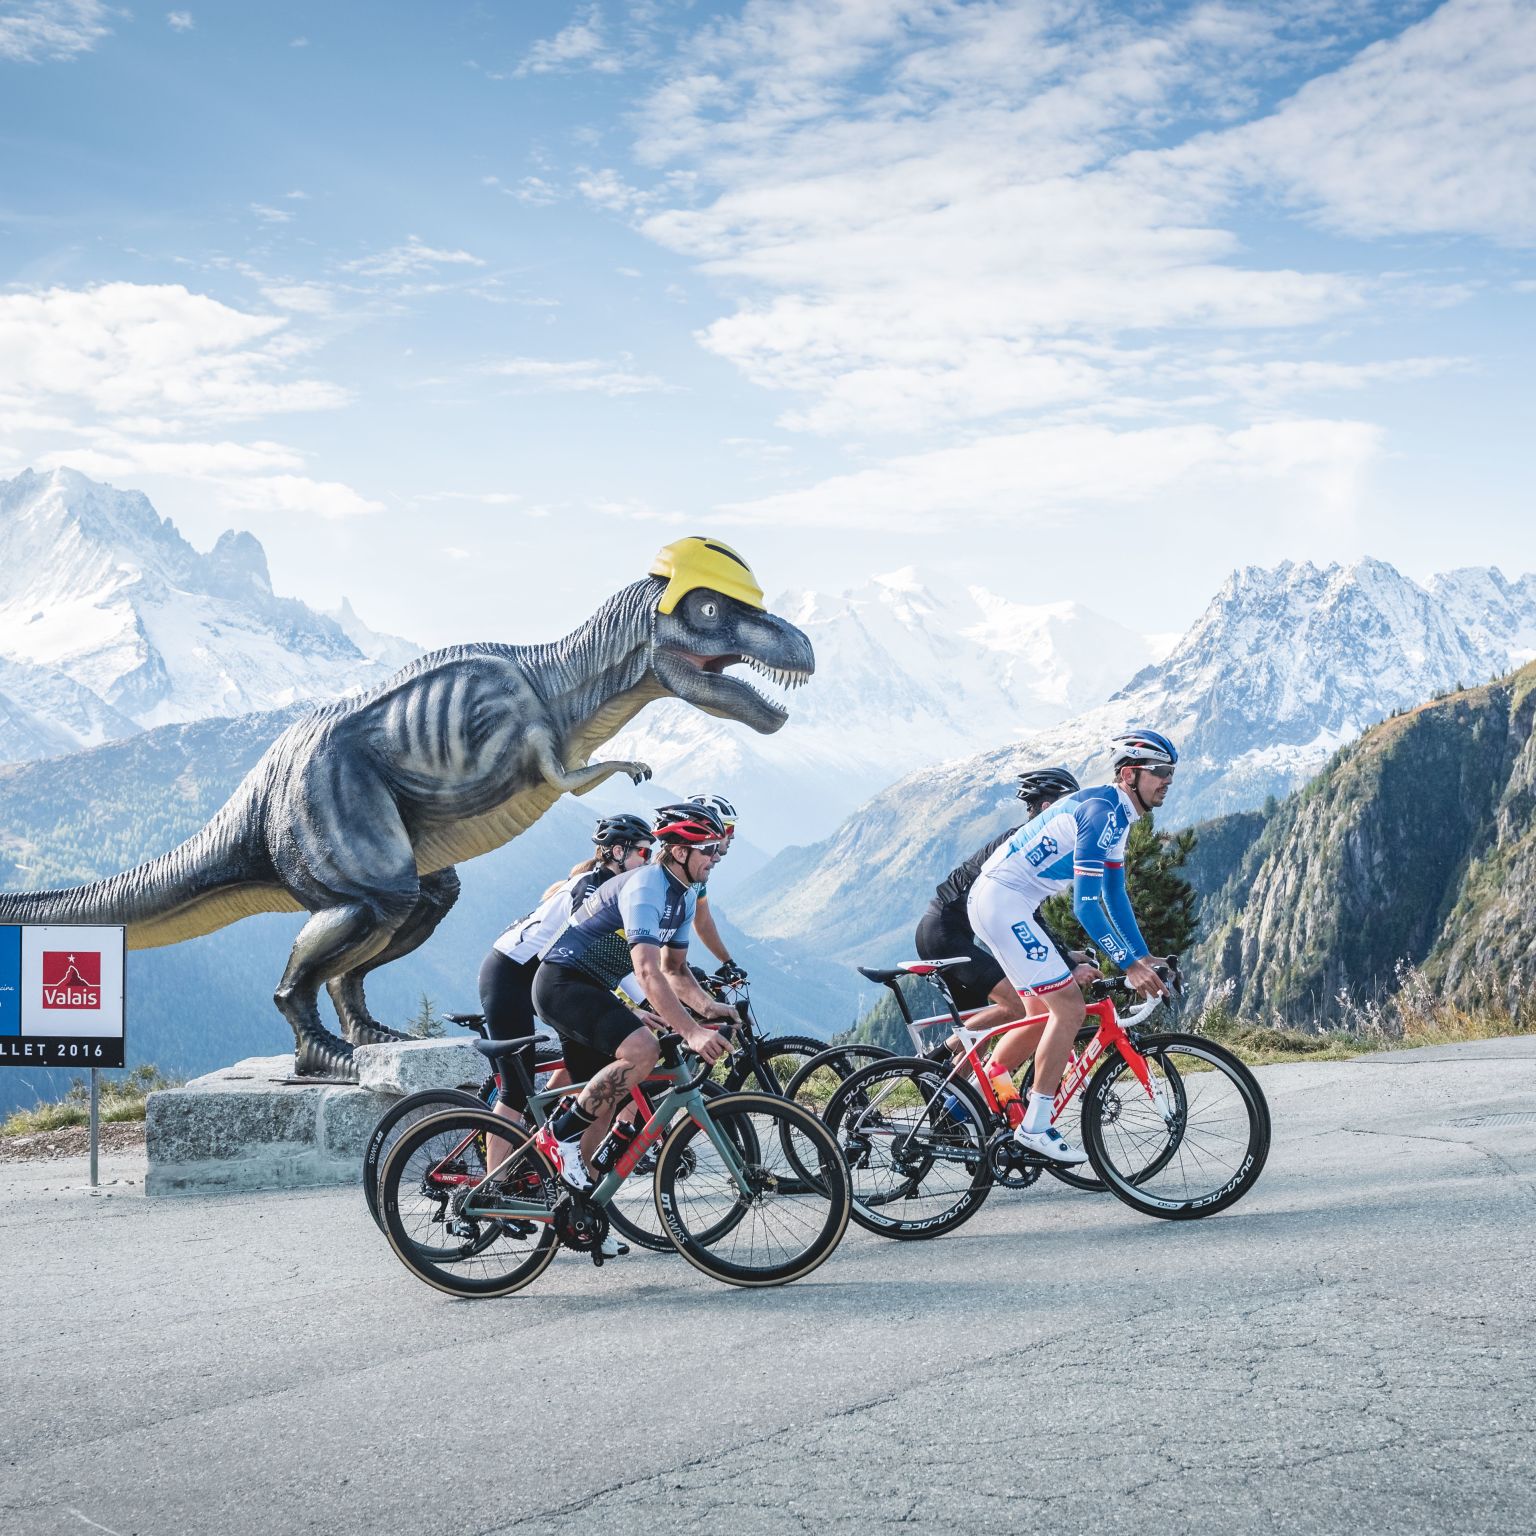 On the tracks of the Tour de France bicycle 
dinosaurs 
mountains Valais Wallis Schweiz Switzerland Suisse